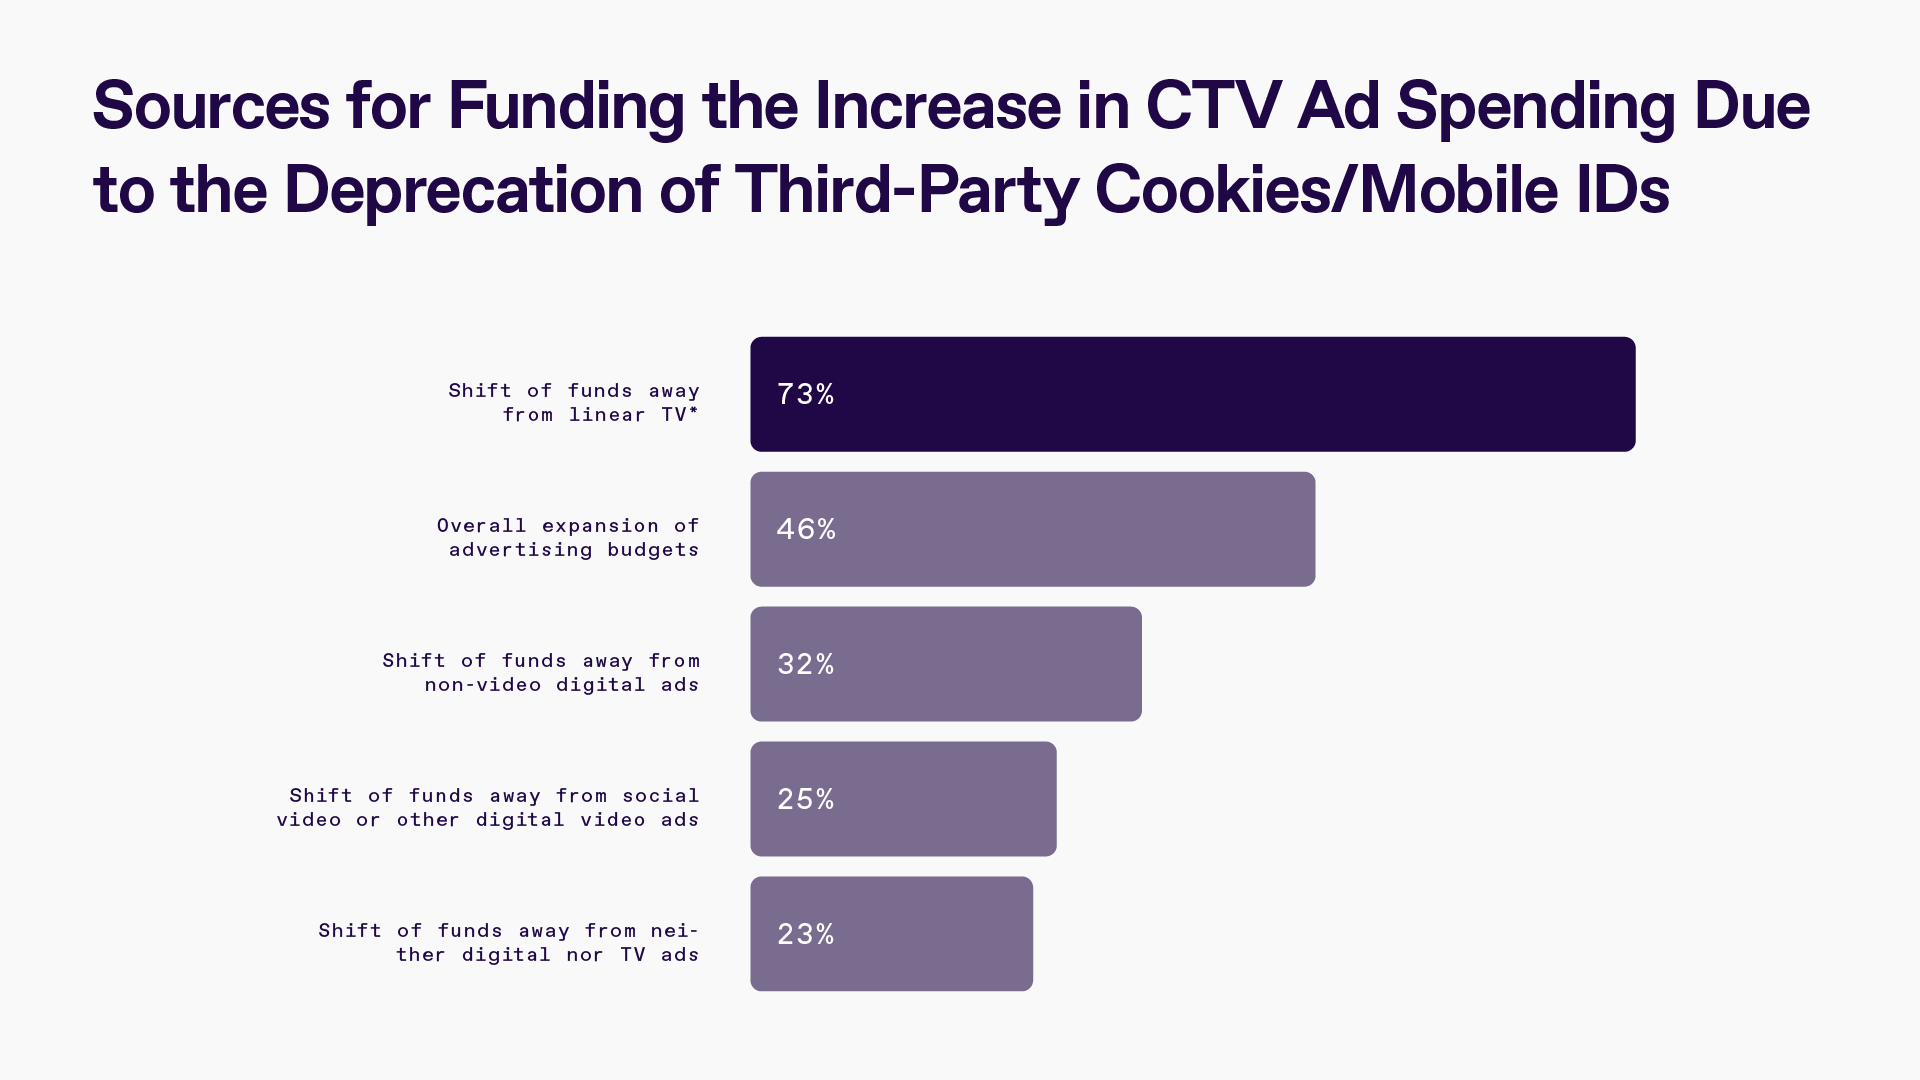 Chart showing the sources for funding the increase in CTV ad spending due to the deprecation of third-party cookies/mobile IDS. Categories from most to least include shift of funds away from linear TV (73%), overall expansion of advertising budgets (46%), shift of funds away from non-video digital ads (32%), shift of funds away from social video or other digital video ads (25%), and shift of funds away from neither digital nor TV ads (23%). 